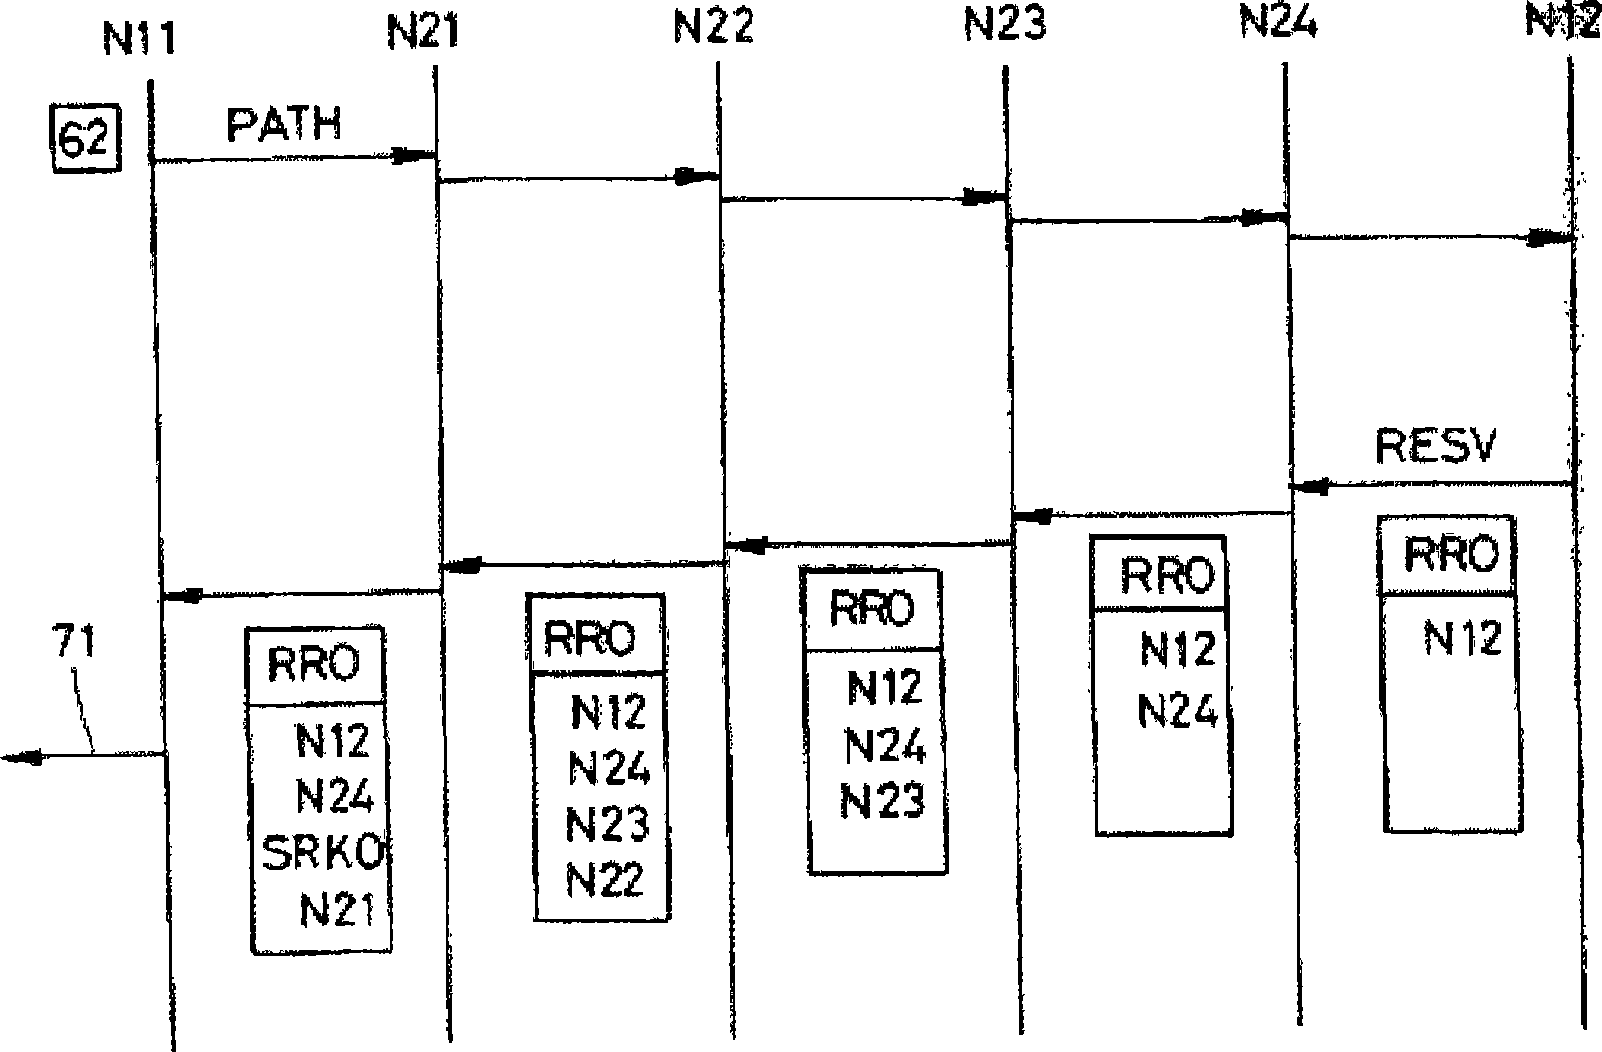 Communication of a risk information in a multi-domain network